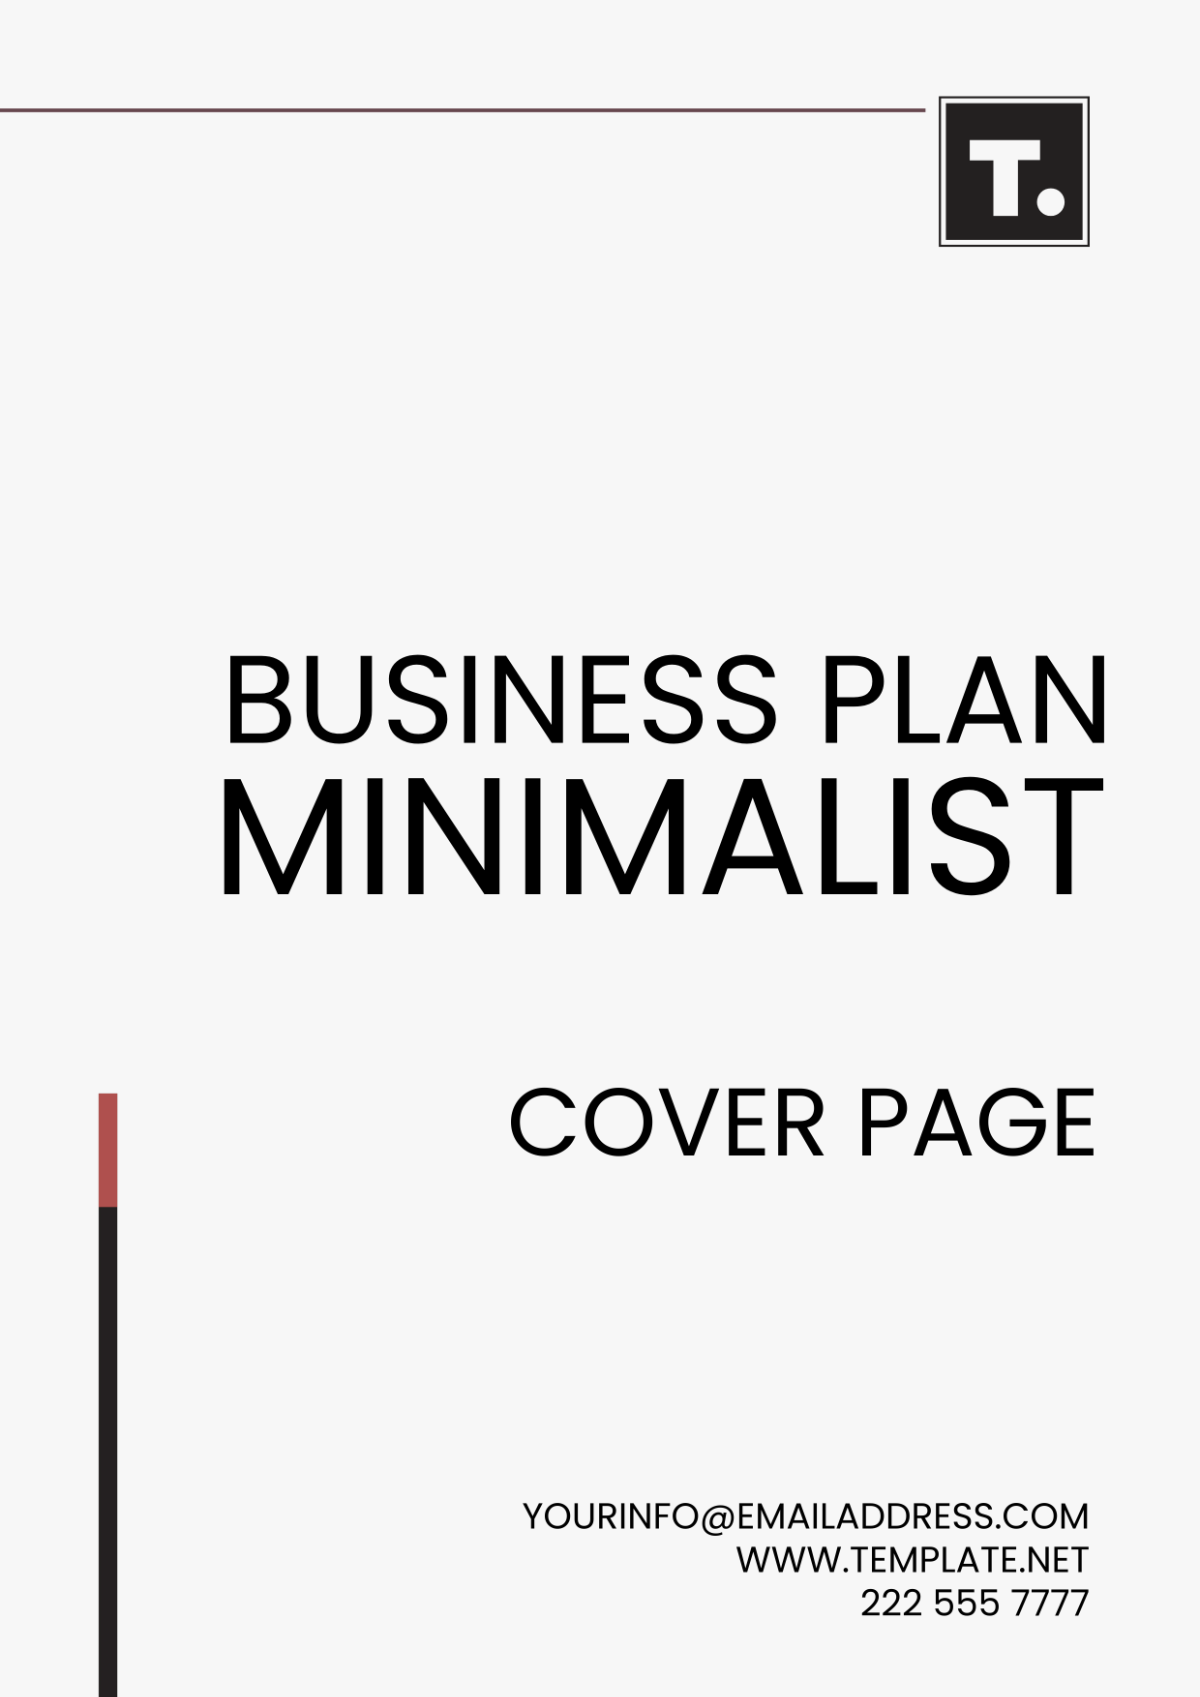 Business Plan Minimalist Cover Page Template